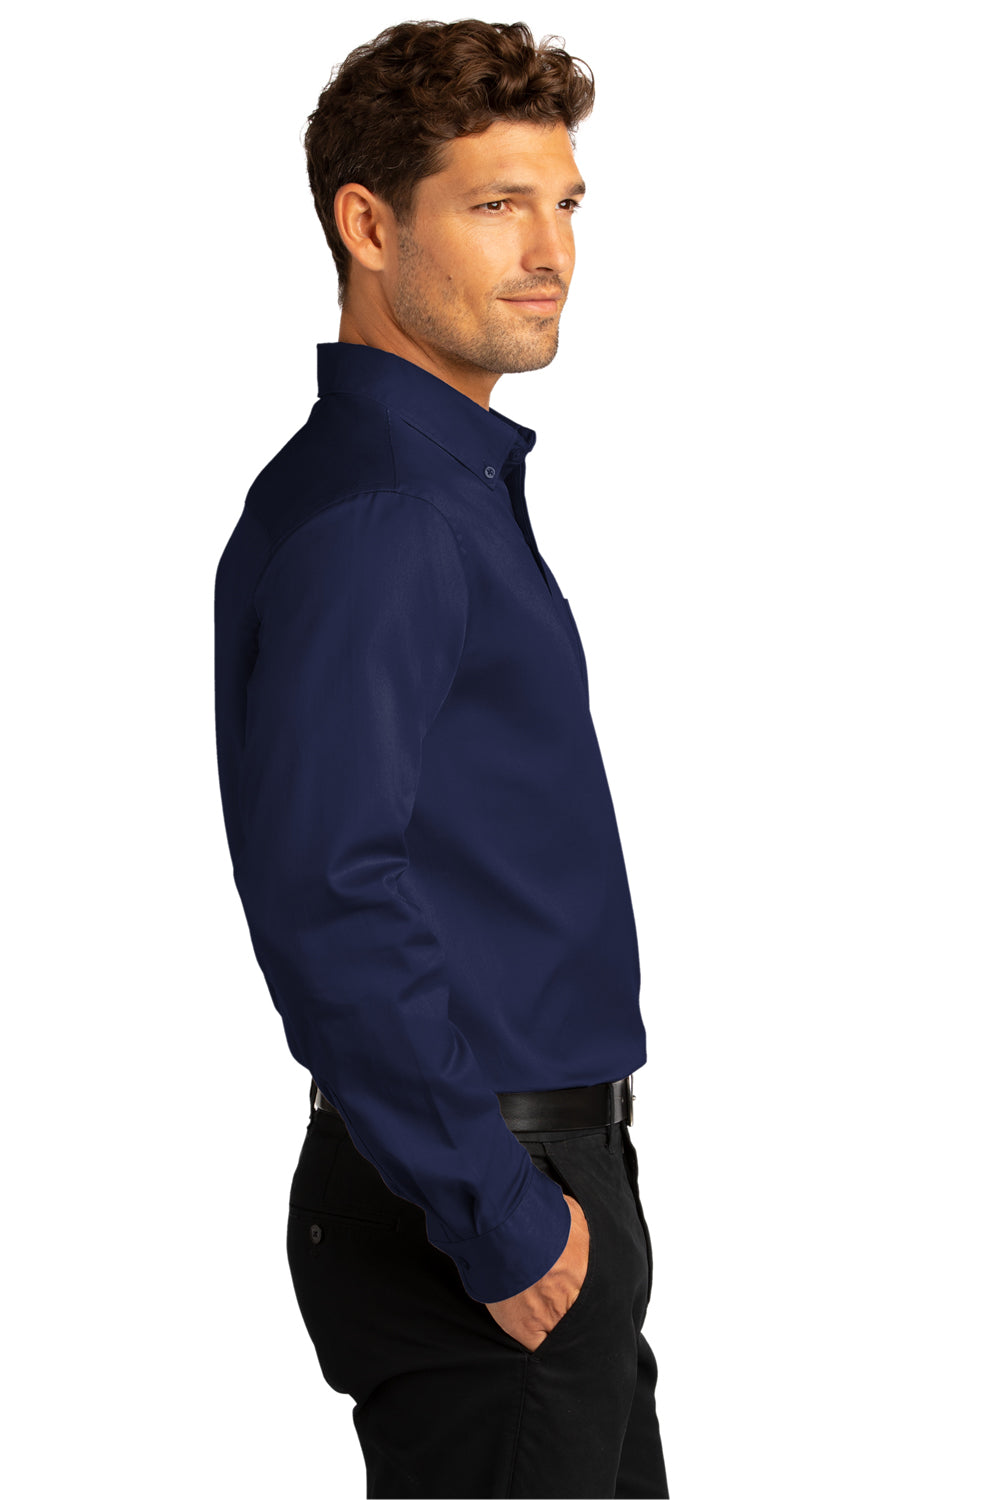 Port Authority Mens SuperPro Wrinkle Resistant React Long Sleeve Button Down Shirt w/ Pocket True Navy Blue Side